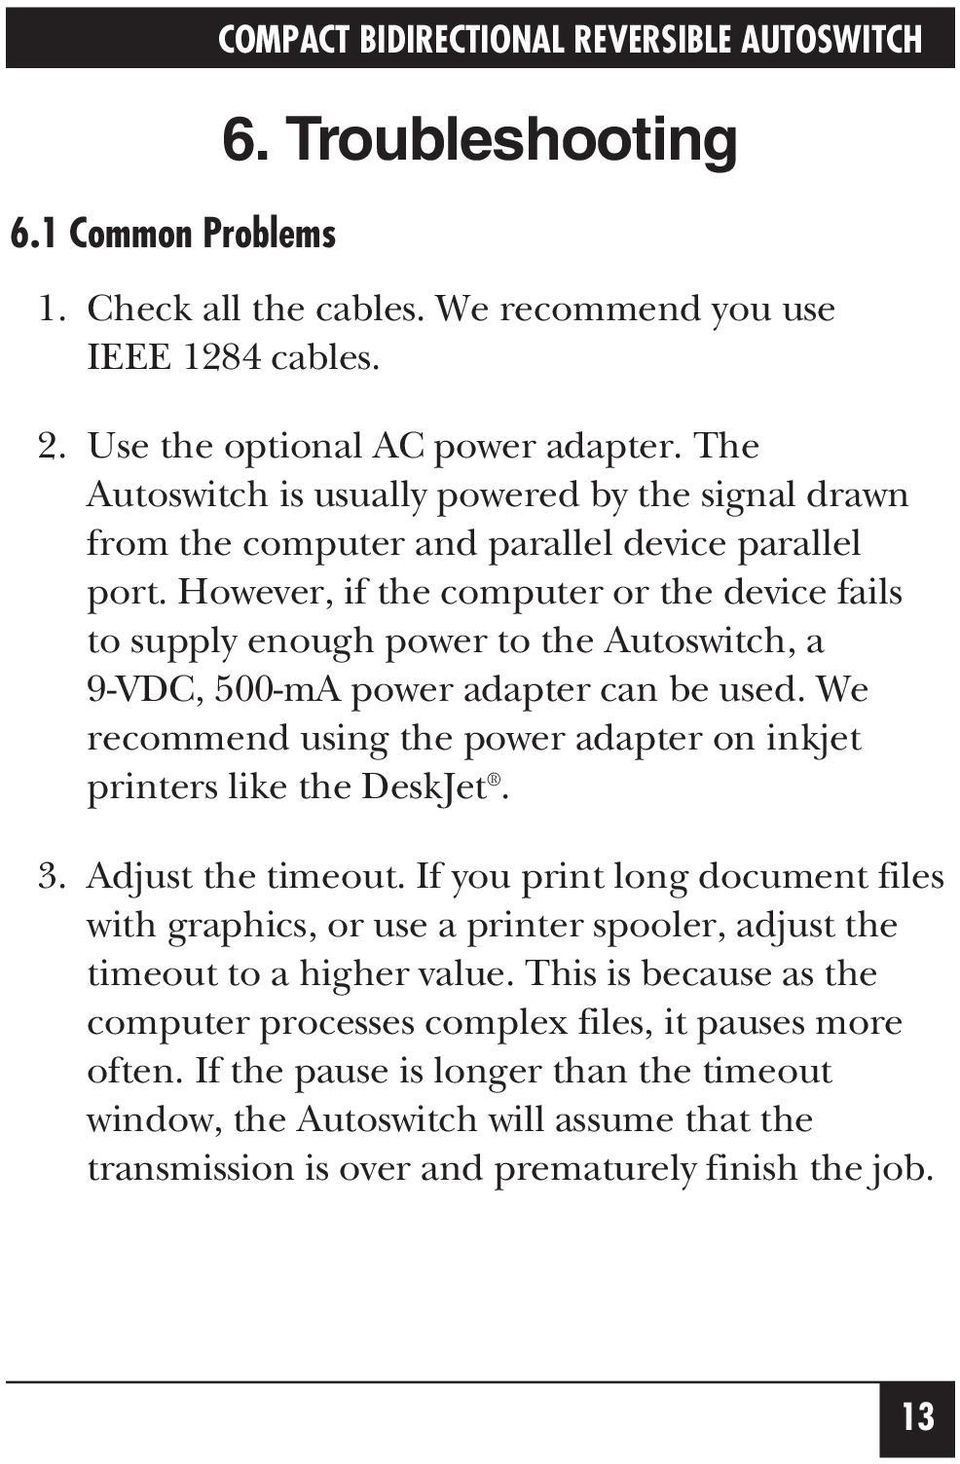 However, if the computer or the device fails to supply enough power to the Autoswitch, a 9-VDC, 500-mA power adapter can be used.